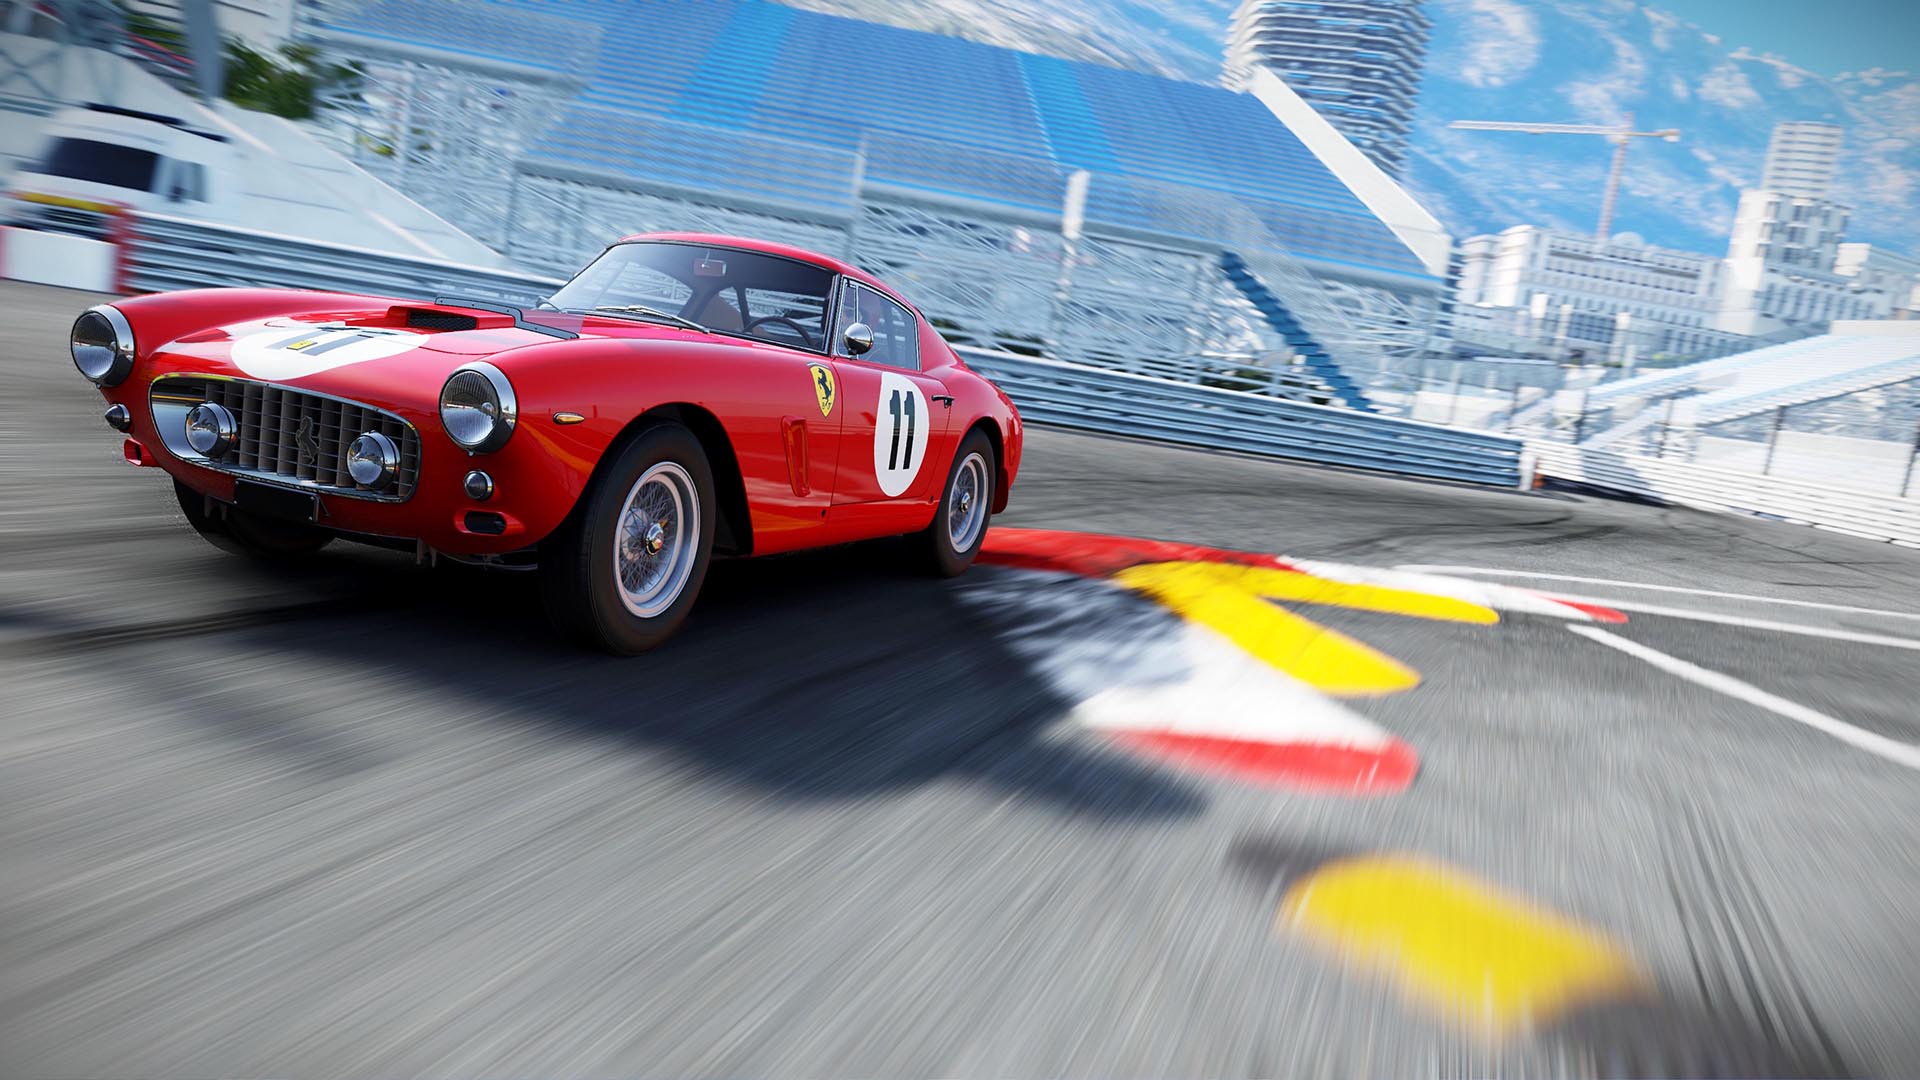 project cars 3 updates